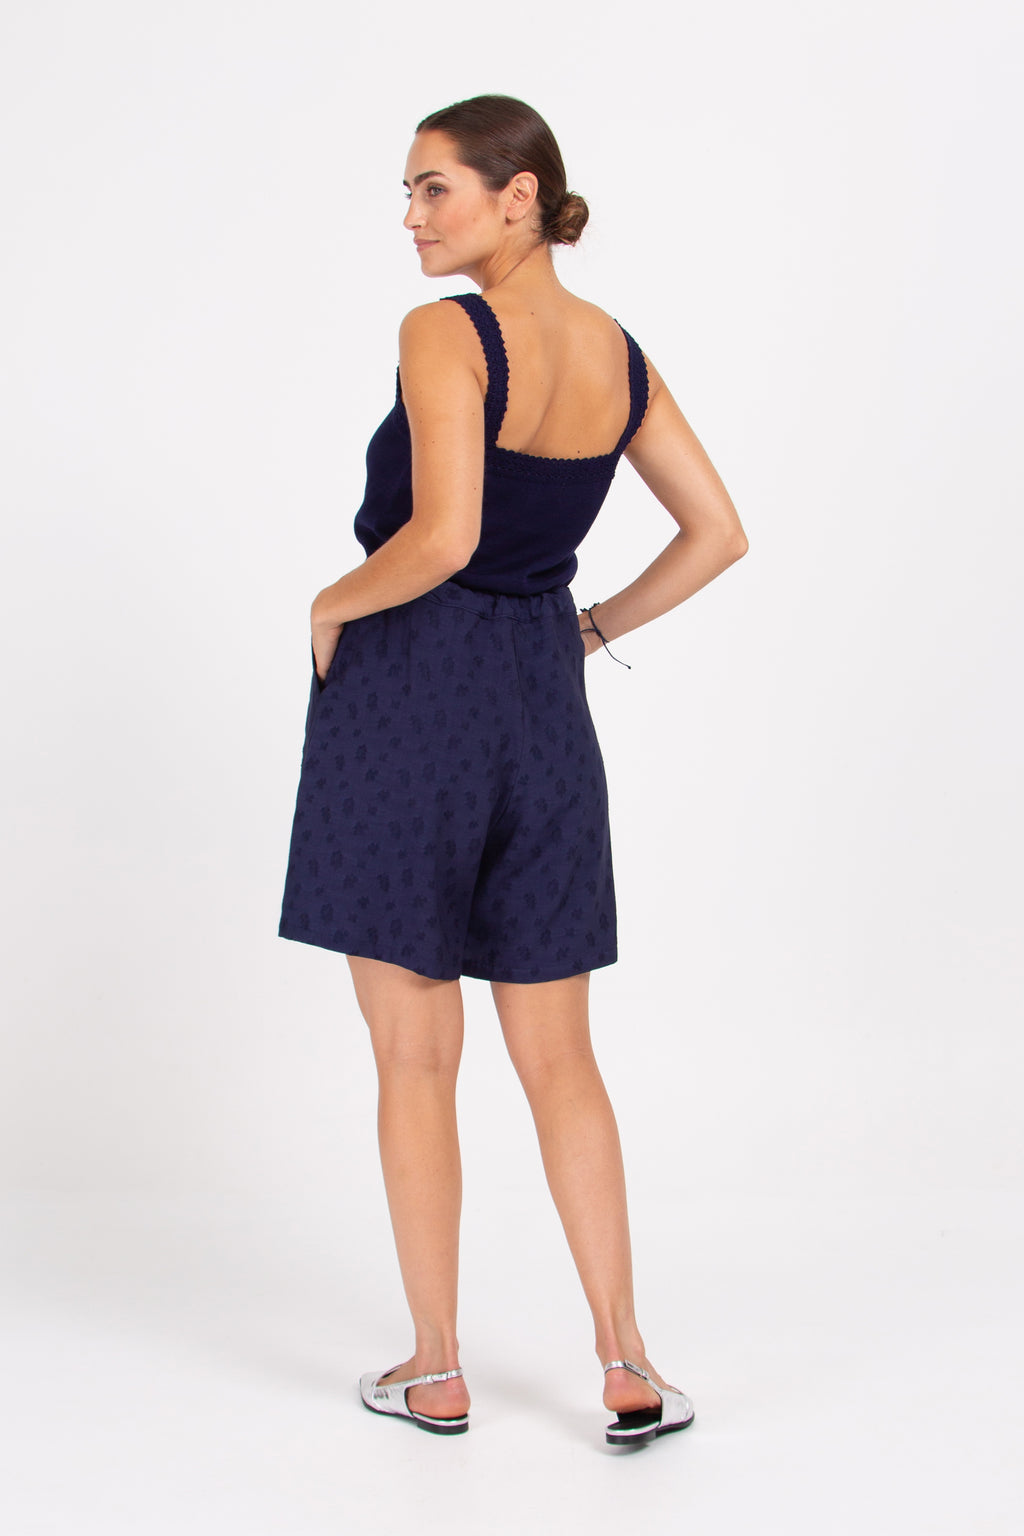 Diede shorts in blue woven berries